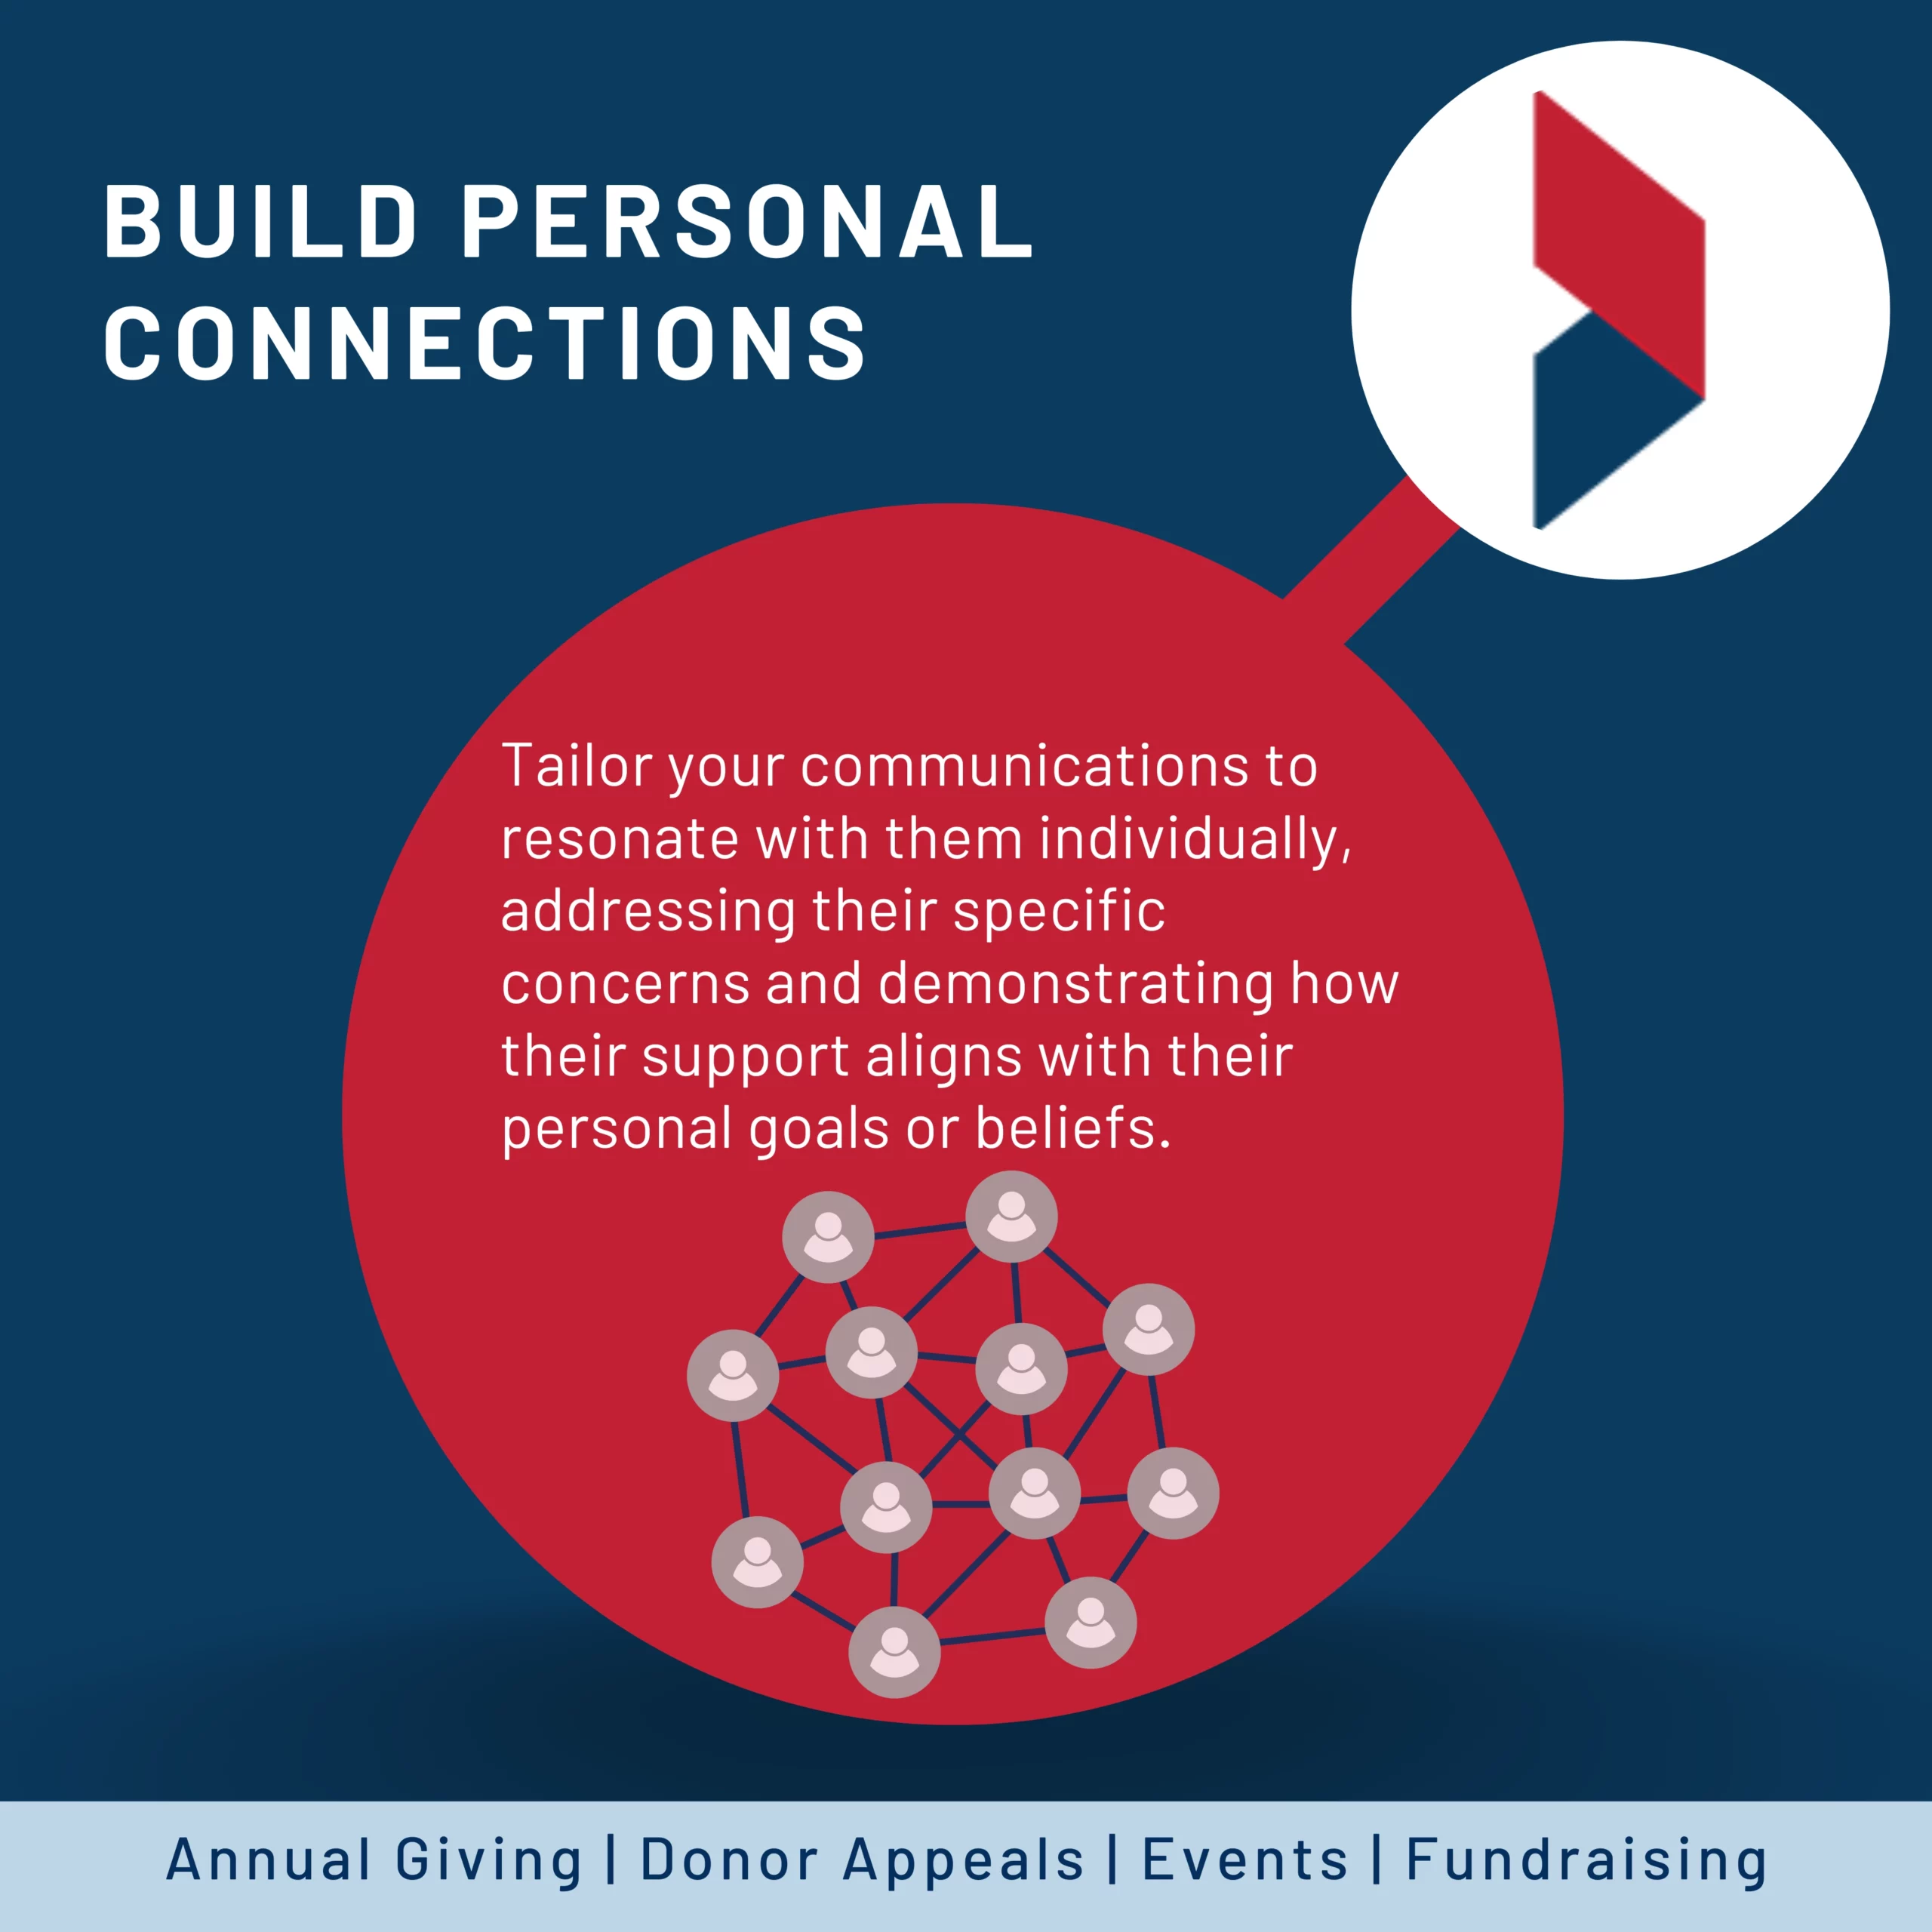 Build personal connections: Establishing personal connections with donors is crucial. Take the time to understand their interests, motivations, and values. Tailor your communications to resonate with them individually, addressing their specific concerns and demonstrating how their support aligns with their personal goals or beliefs.